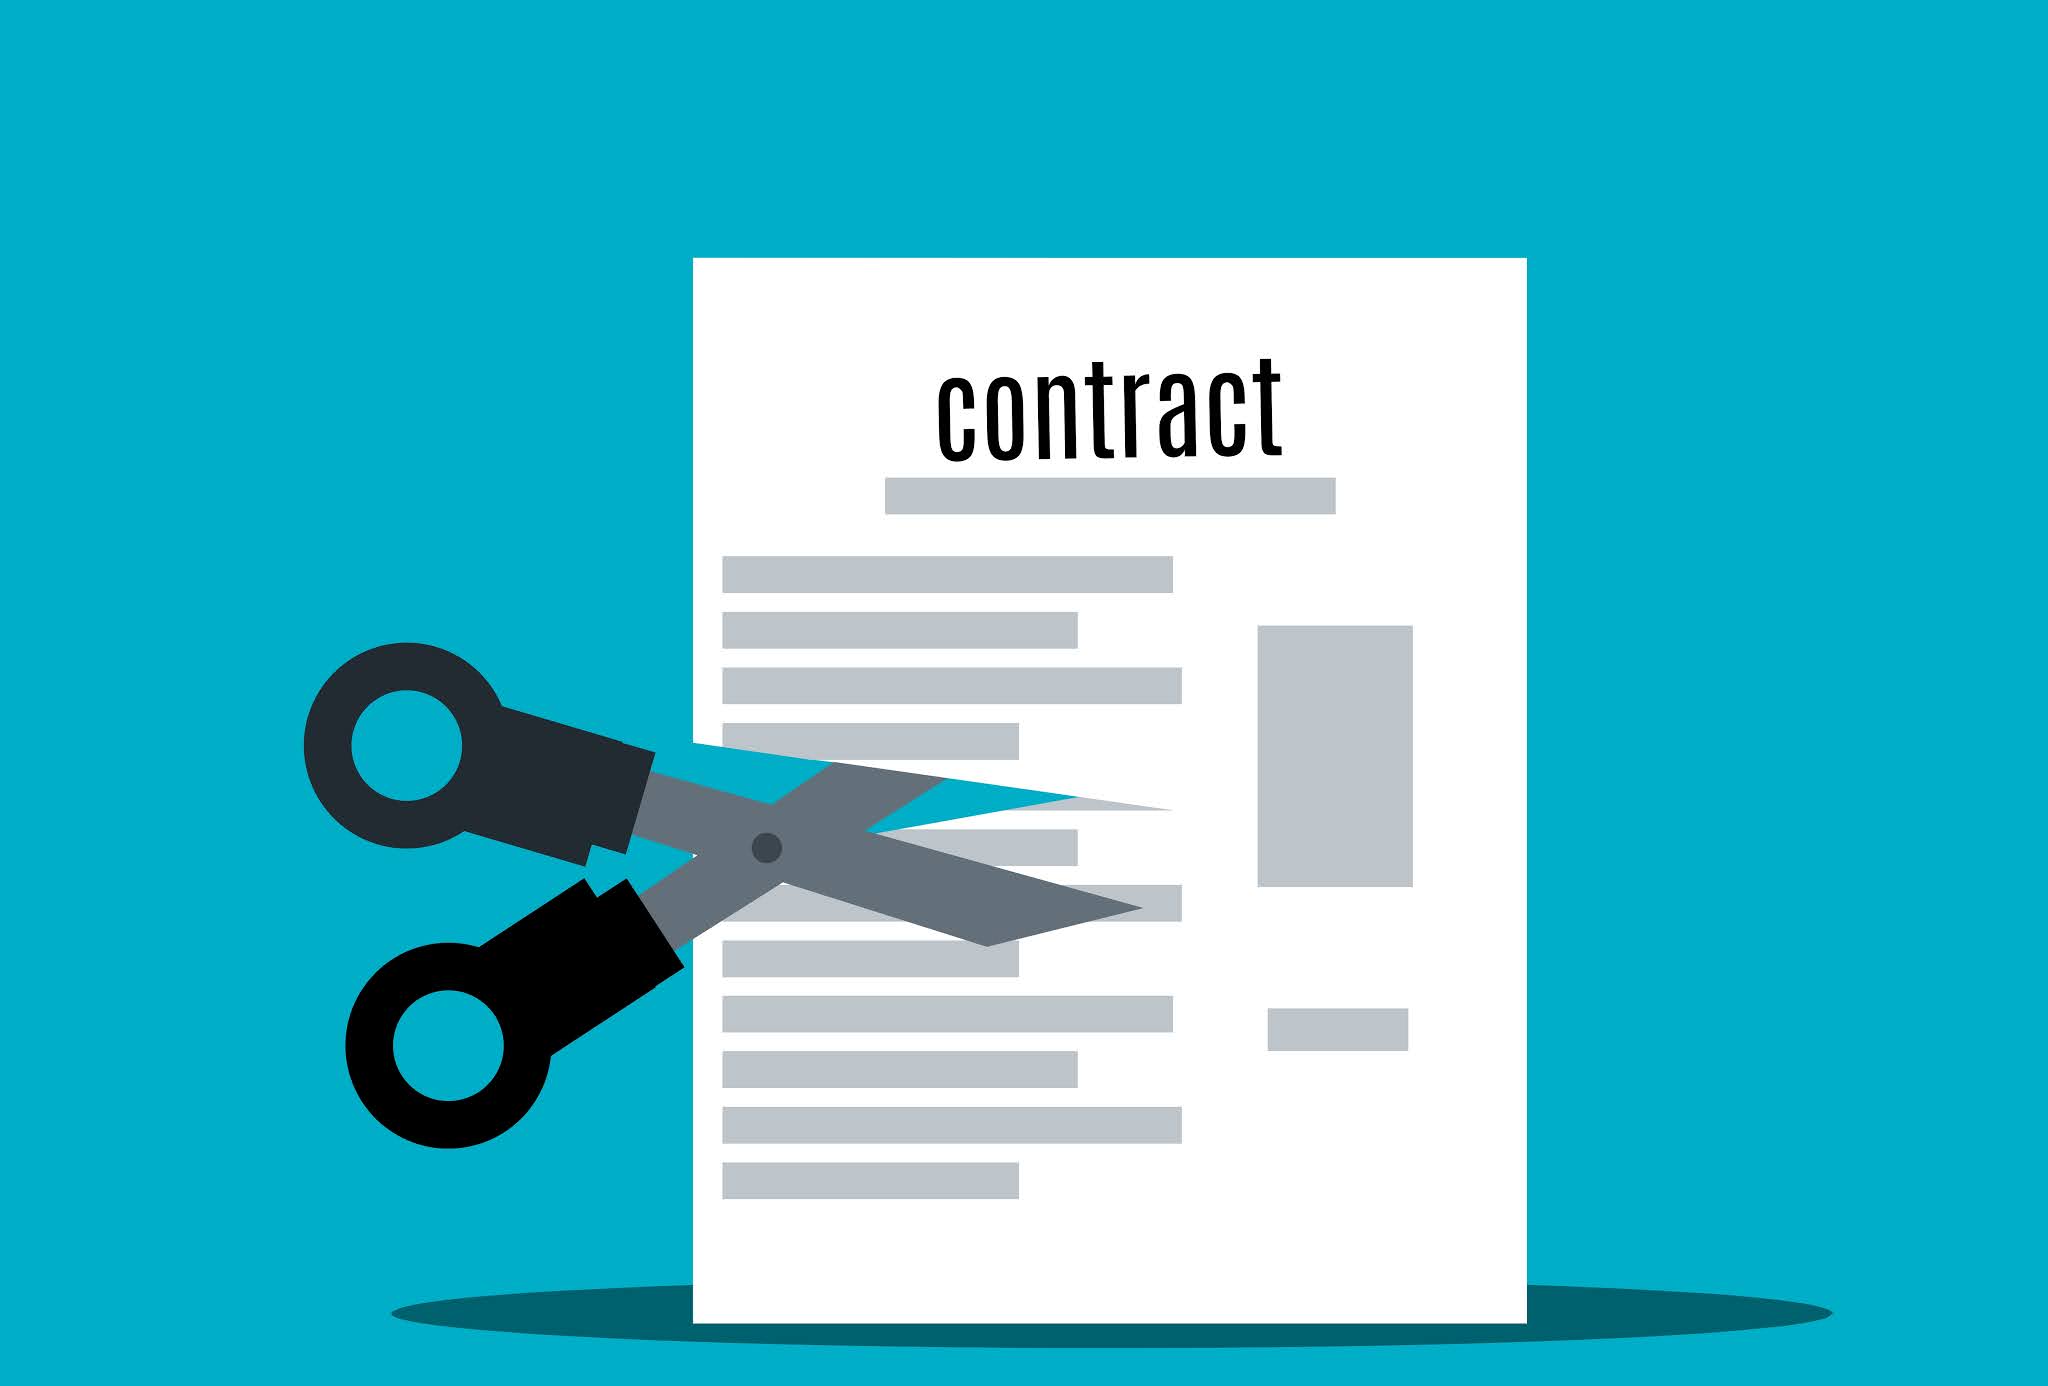 Business contract termination graphic design